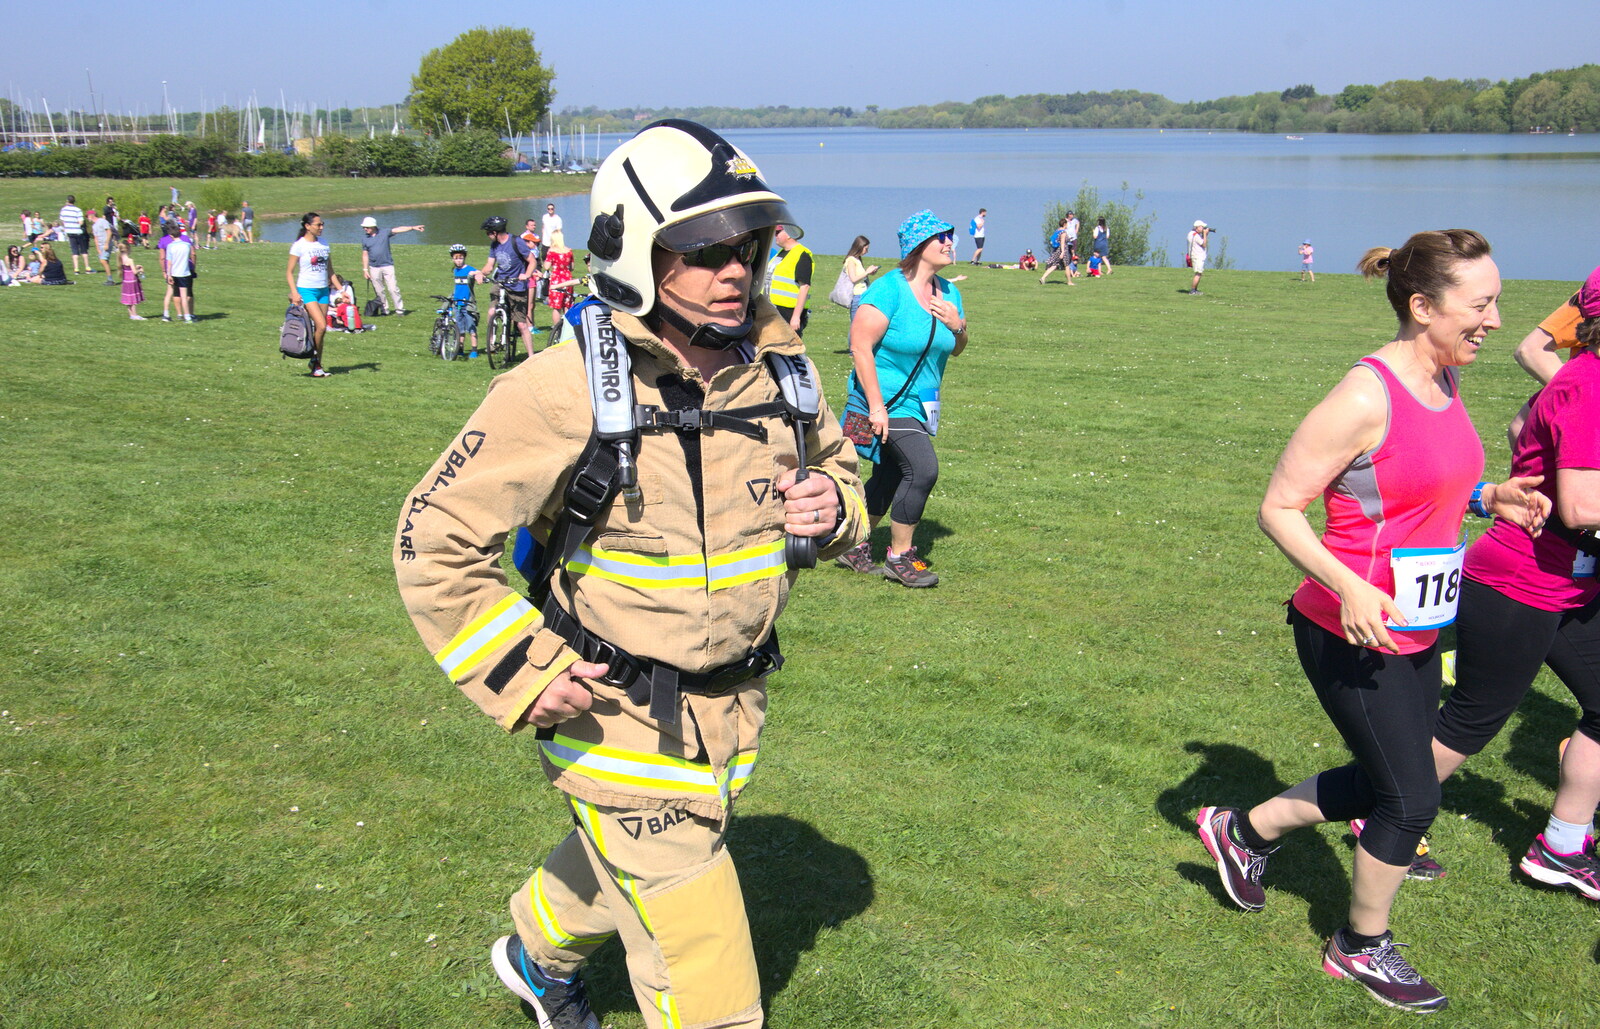 Firefighter Dale Mason is running 10km in full gear from Isobel's 10km Run, Alton Water, Stutton, Suffolk - 6th May 2018